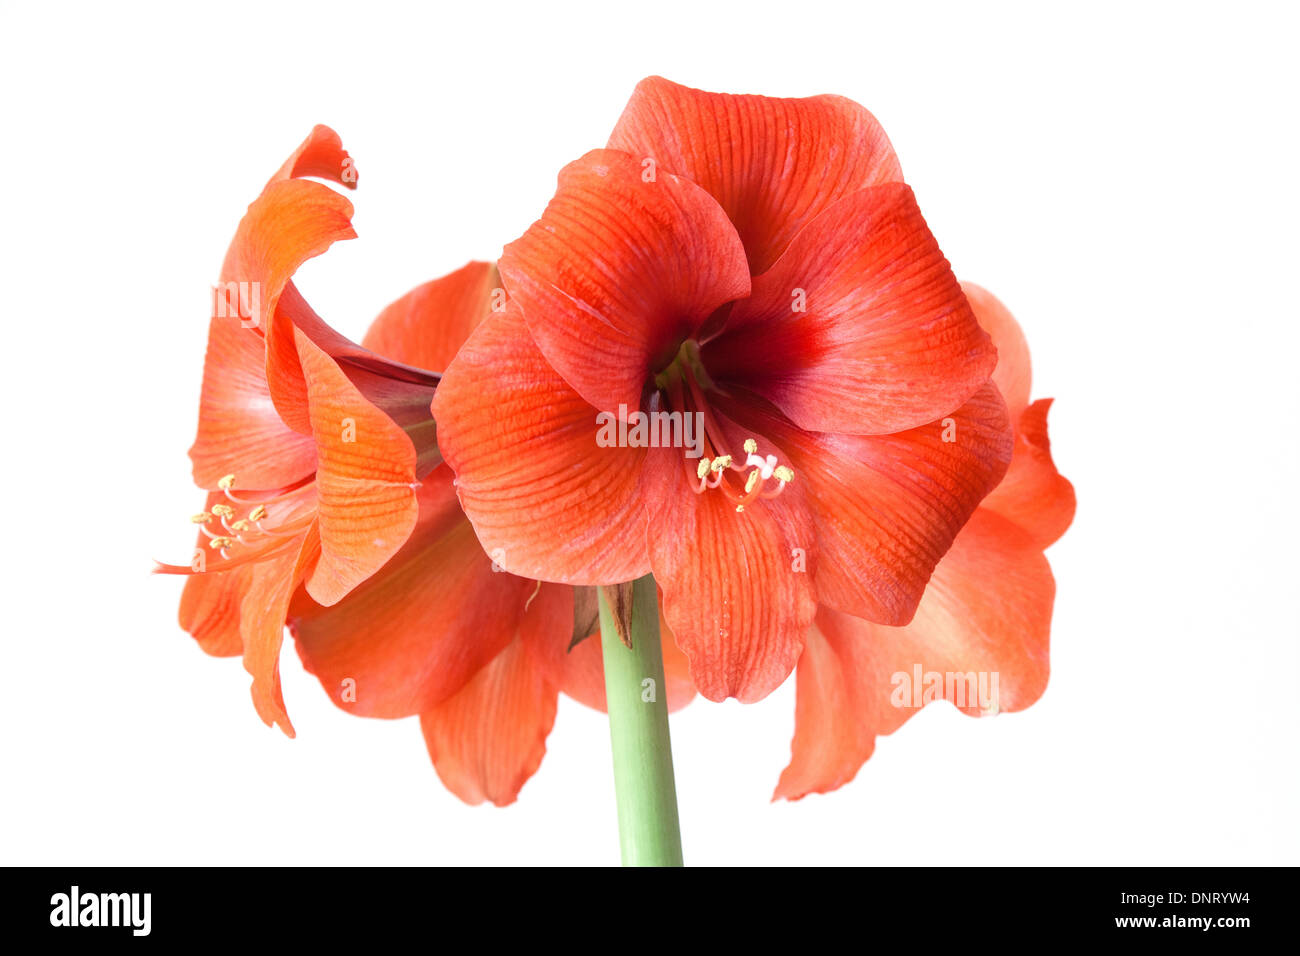 Coral red amaryllis flower isolated on a white studio background. Stock Photo